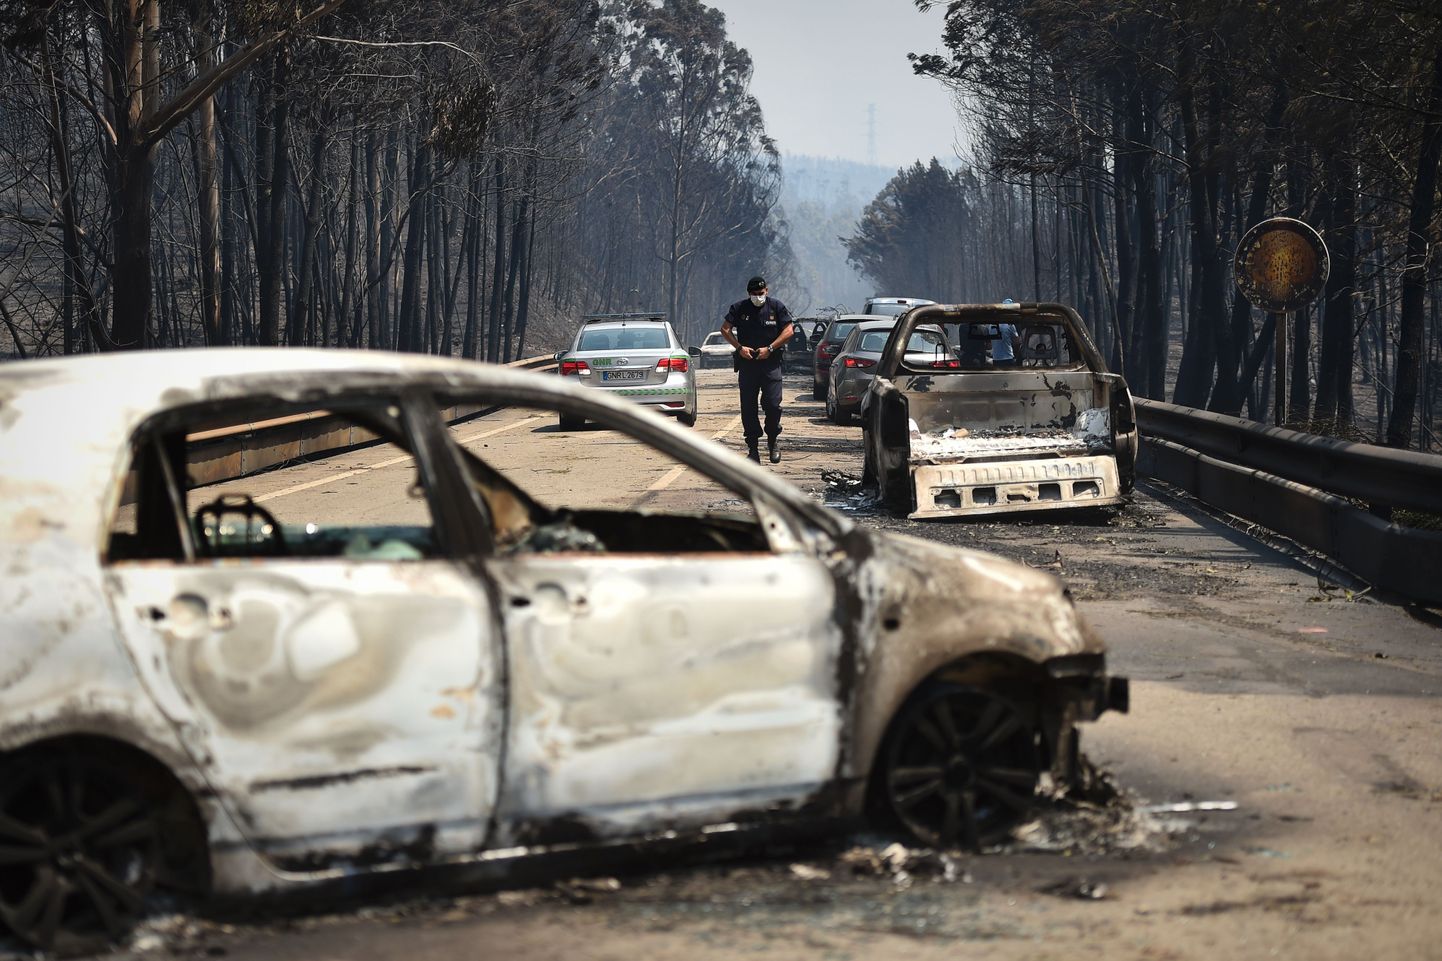 TOPSHOT - A policeman walks on a road past burnt cars after a wildfire in Figueiro dos Vinhos  on June 18, 2017.
A wildfire in central Portugal killed at least 57 people and injured 59 others, most of them burning to death in their cars, the government said on June 18, 2017. Several hundred firefighters and 160 vehicles were dispatched late on June 17 to tackle the blaze, which broke out in the afternoon in the municipality of Pedrogao Grande before spreading fast across several fronts.    / AFP PHOTO / PATRICIA DE MELO MOREIRA